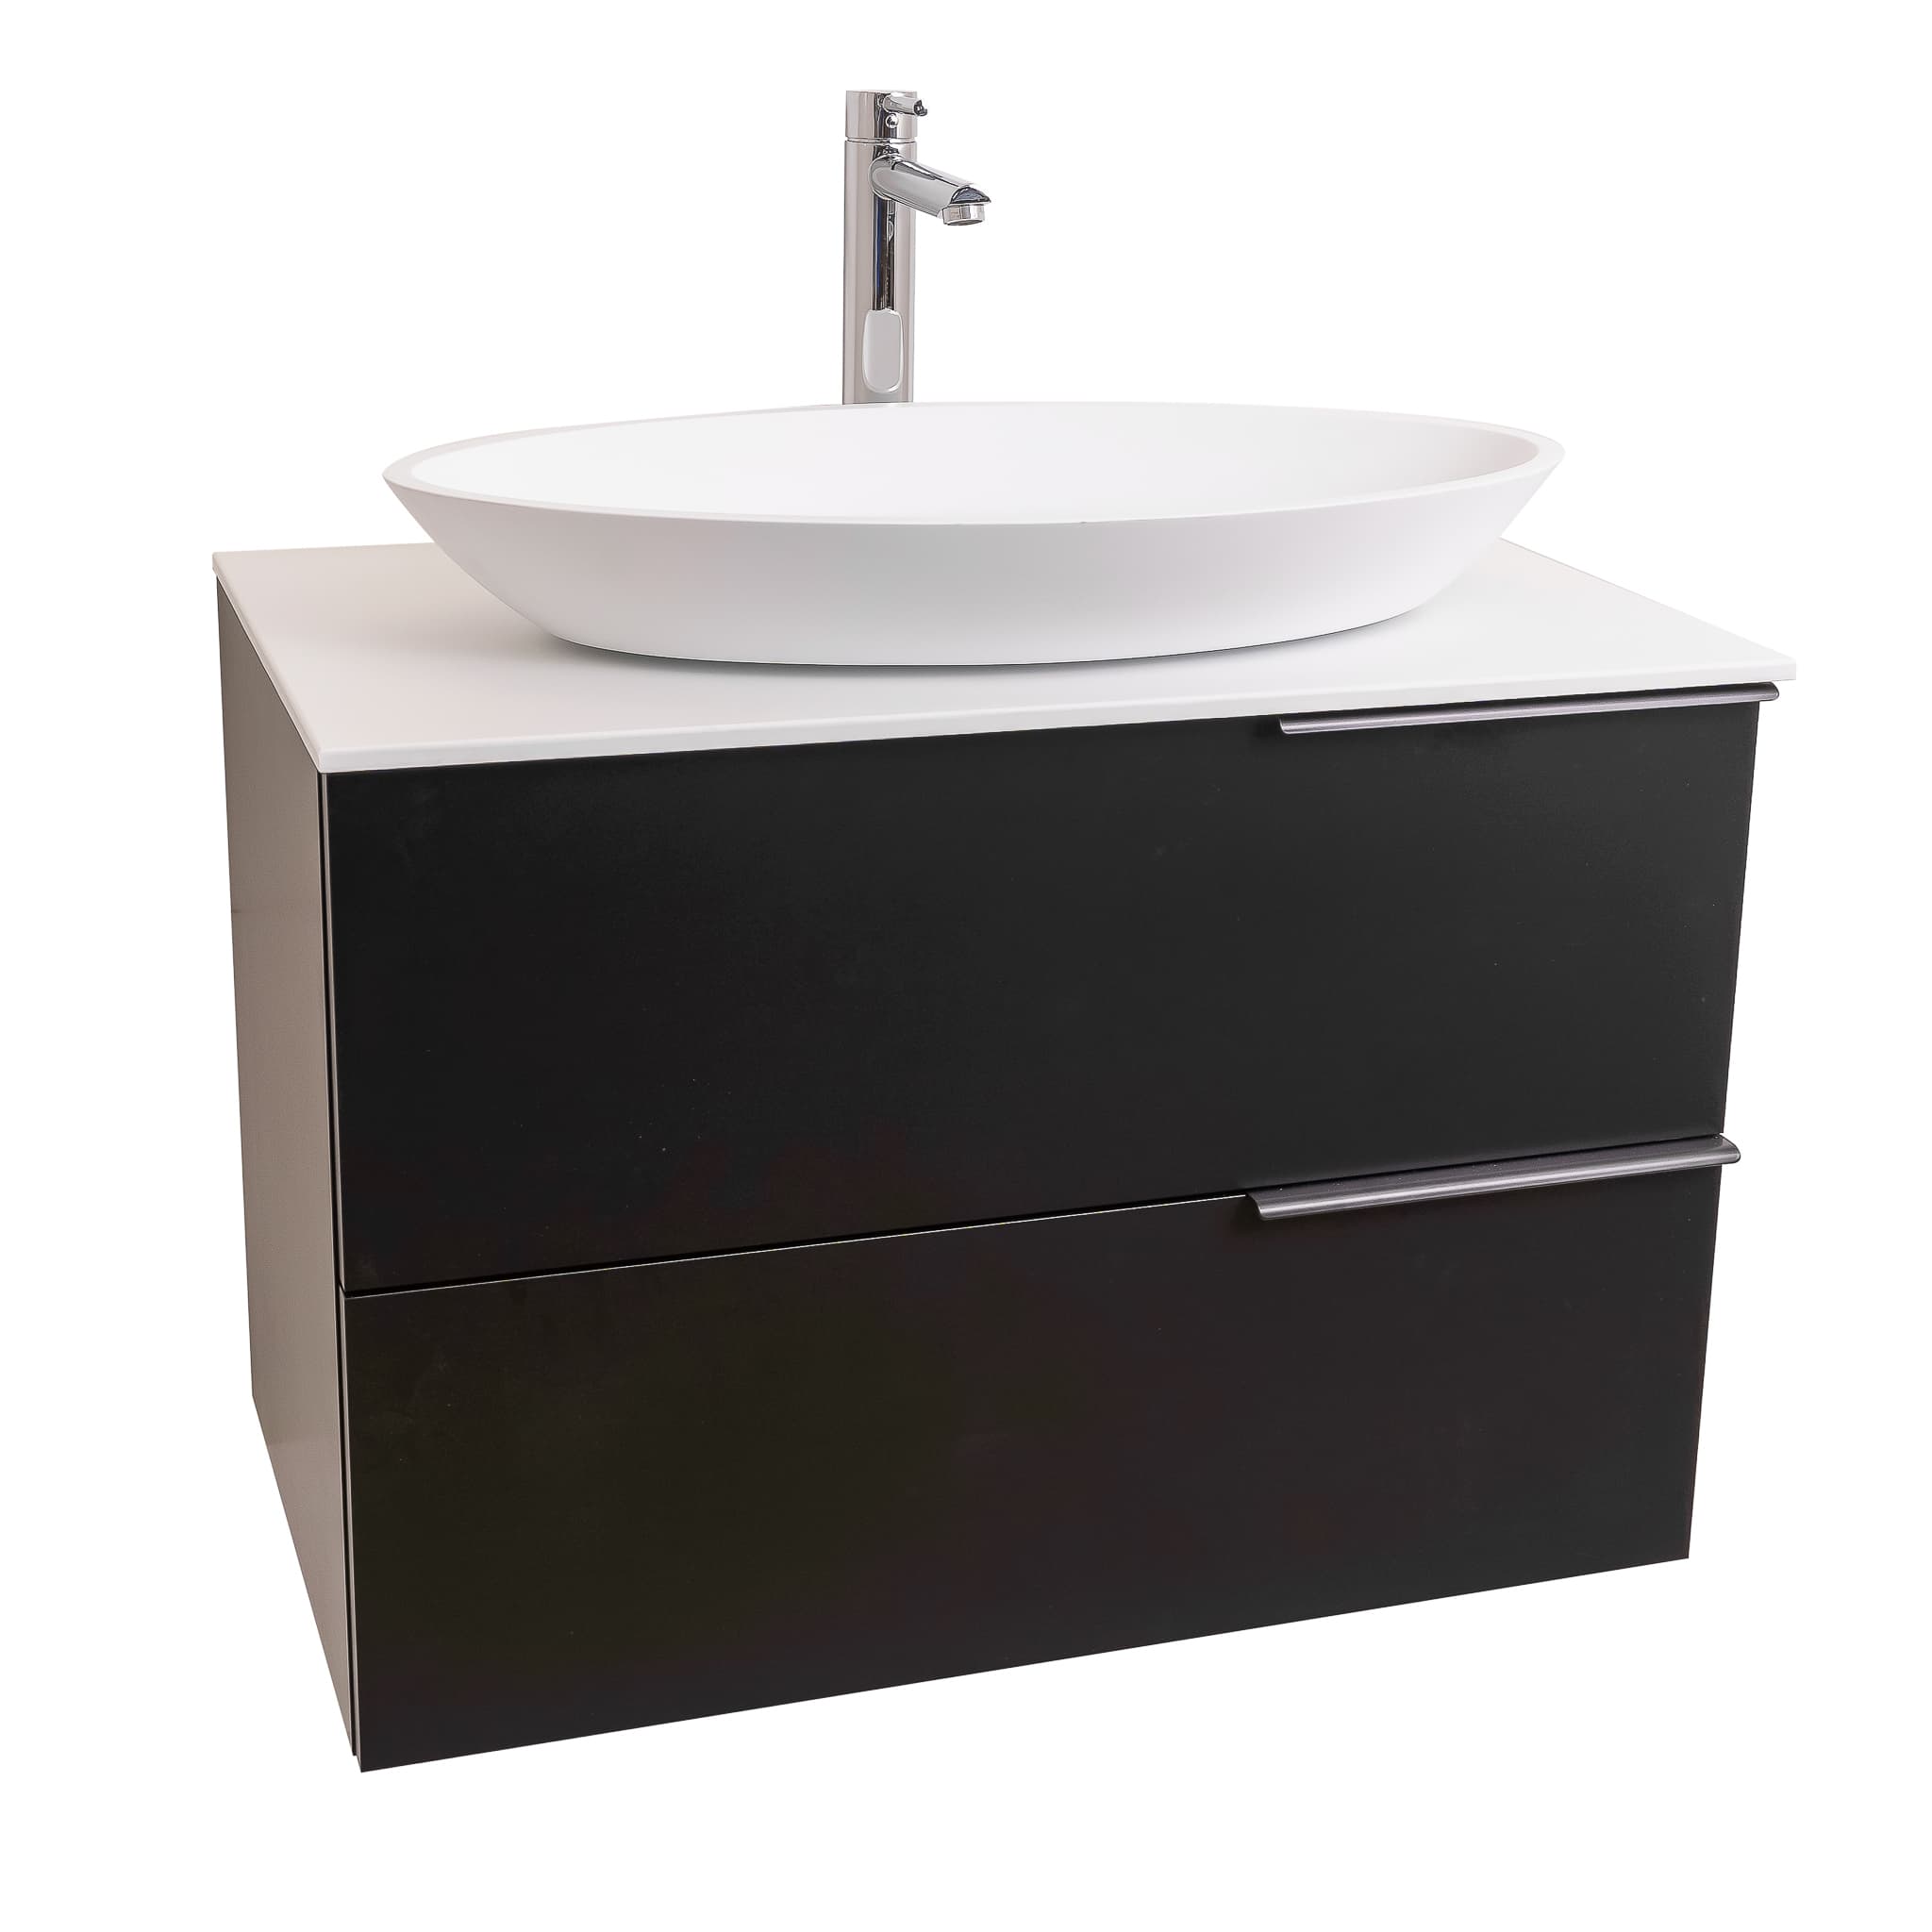 Mallorca 39.5 Matte Black Cabinet, Solid Surface Flat White Counter And Oval Solid Surface White Basin 1305, Wall Mounted Modern Vanity Set